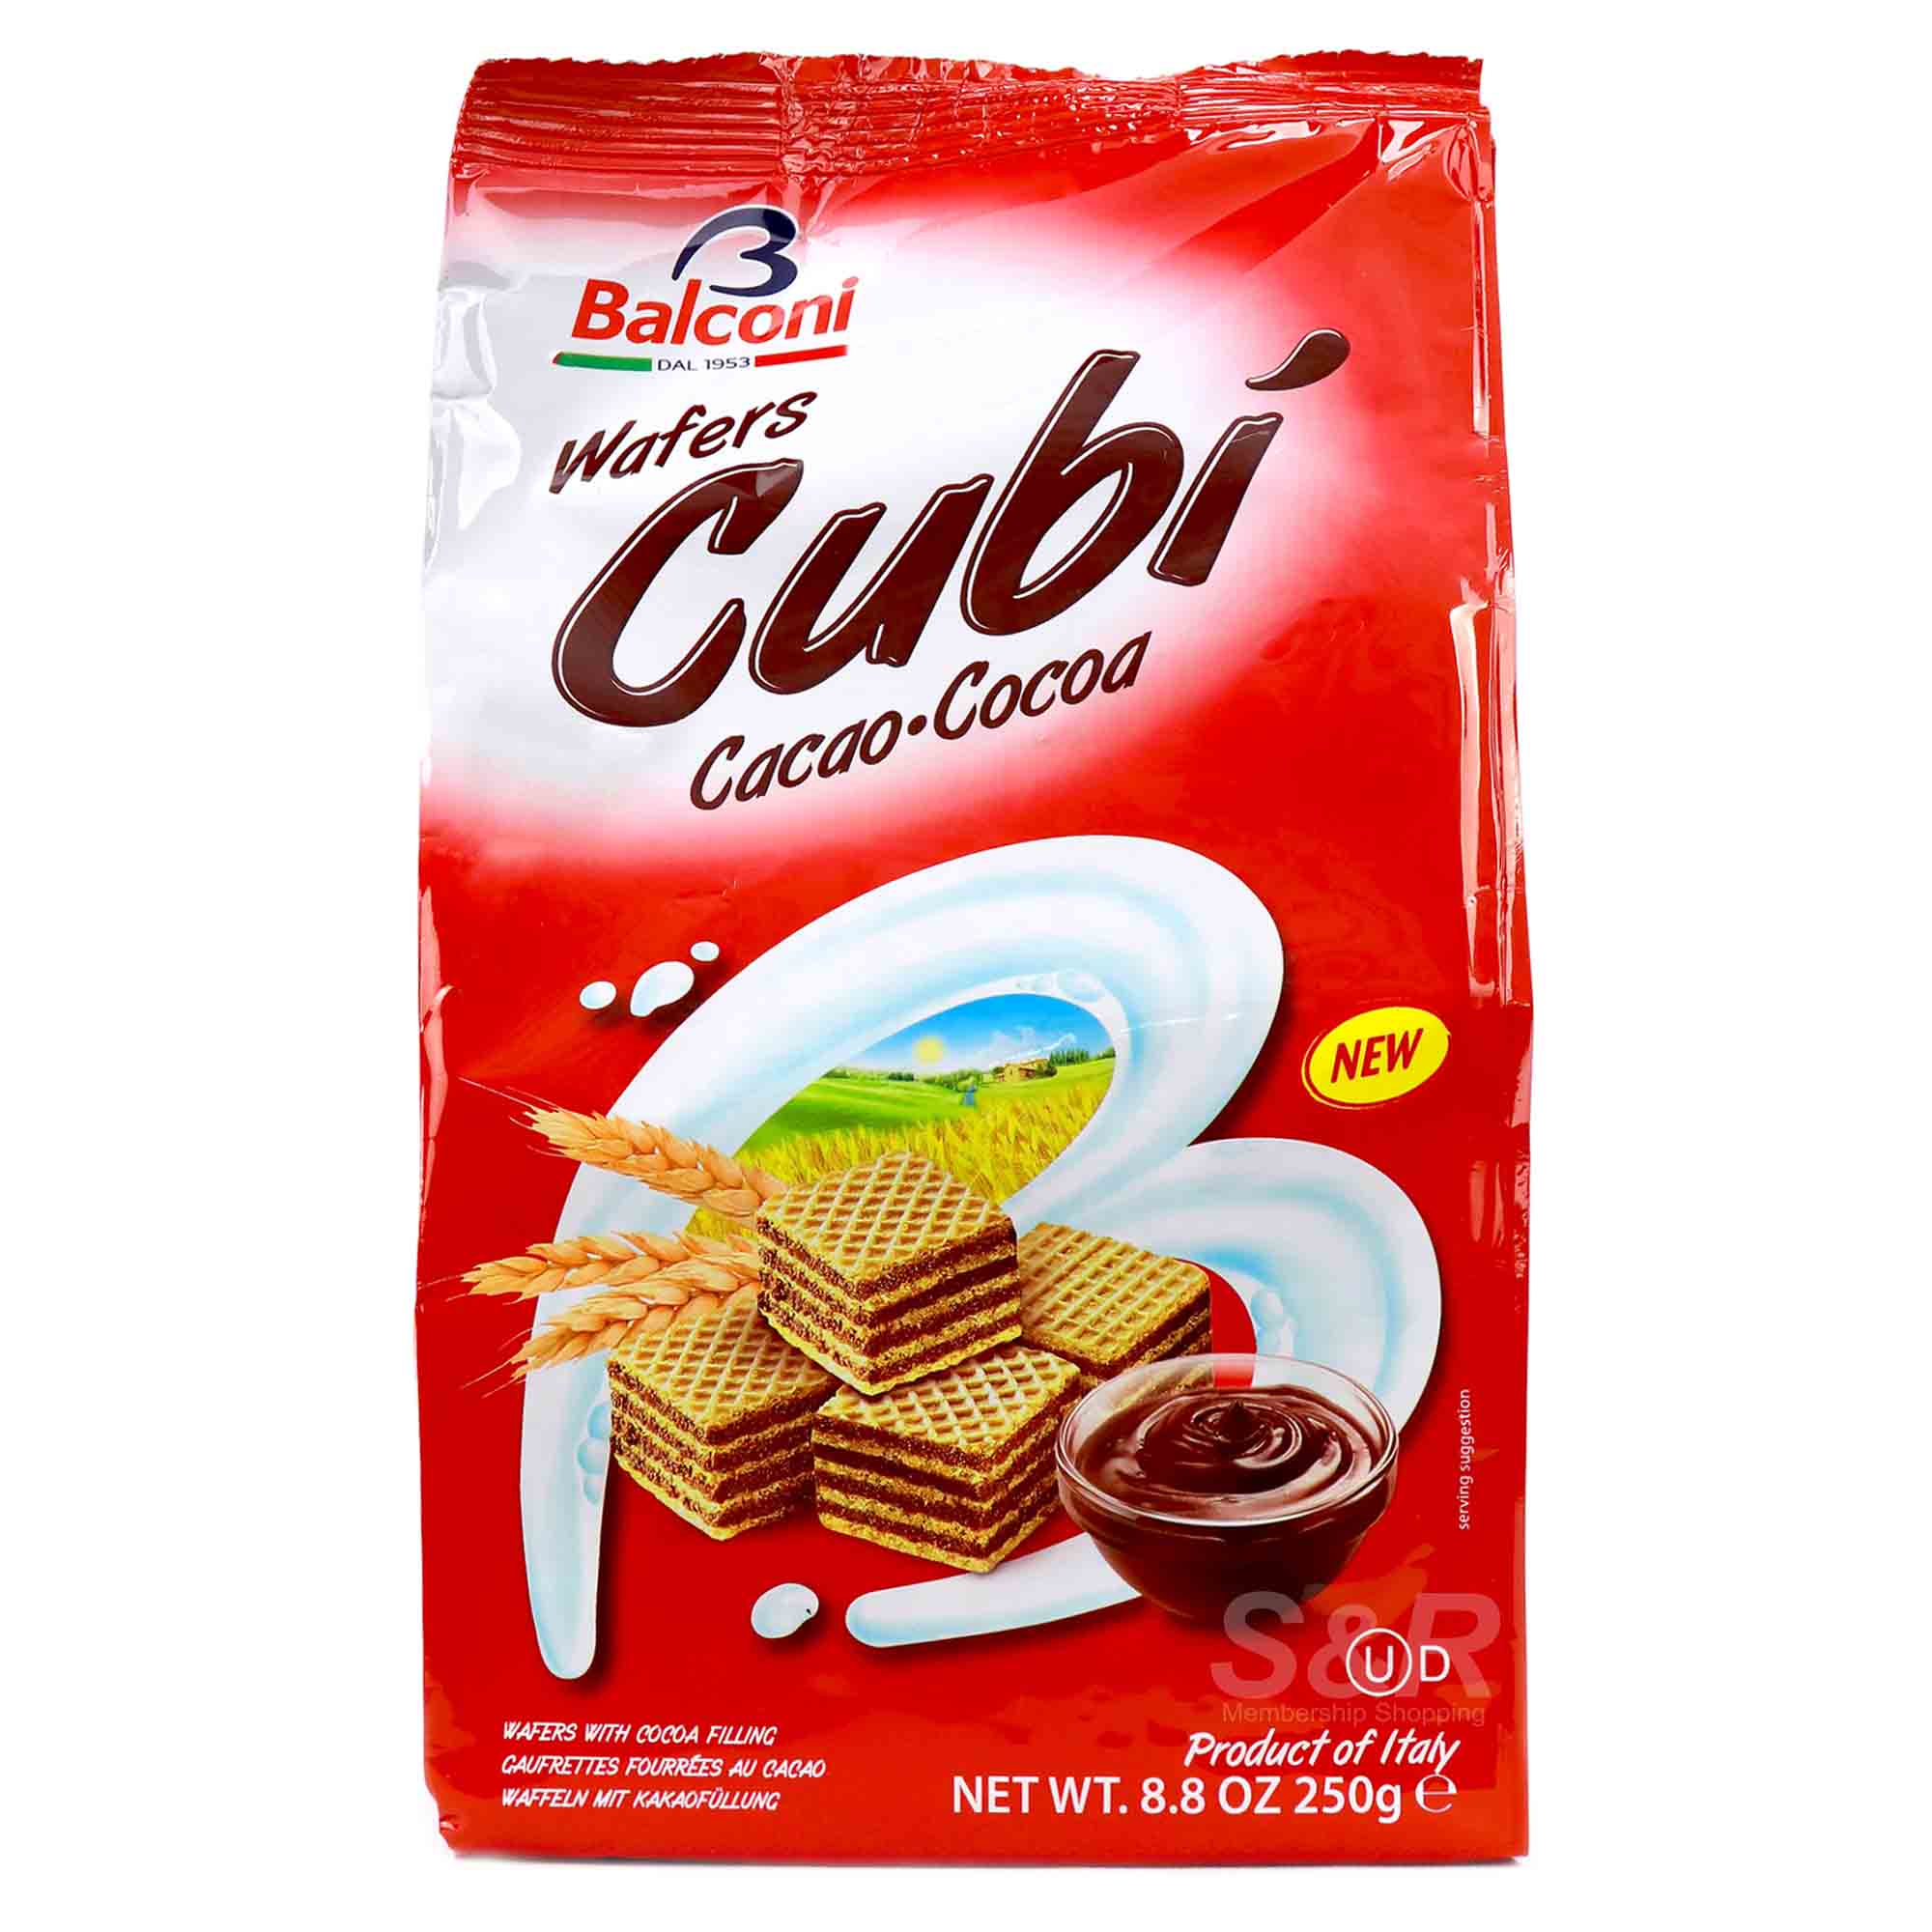 Balconi Wafers Cubi Cacao 250g